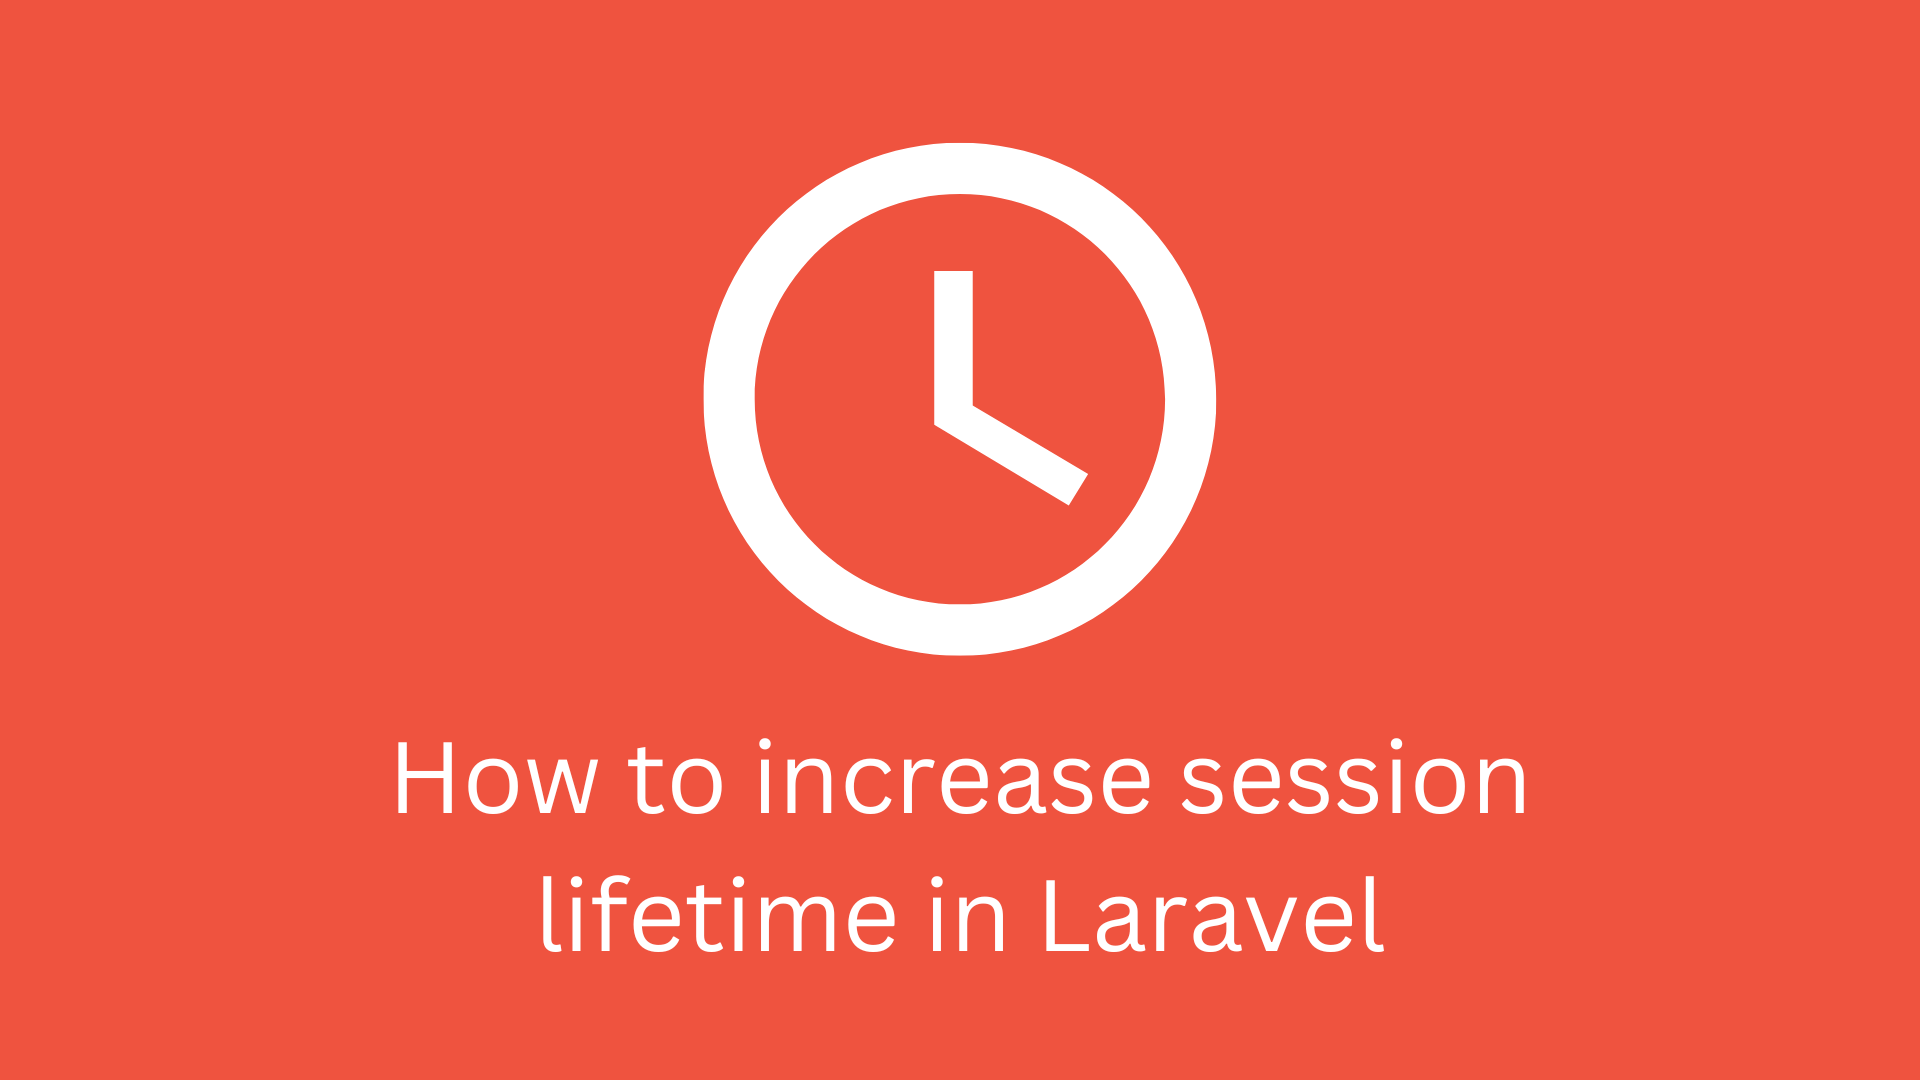 How to increase session lifetime in Laravel